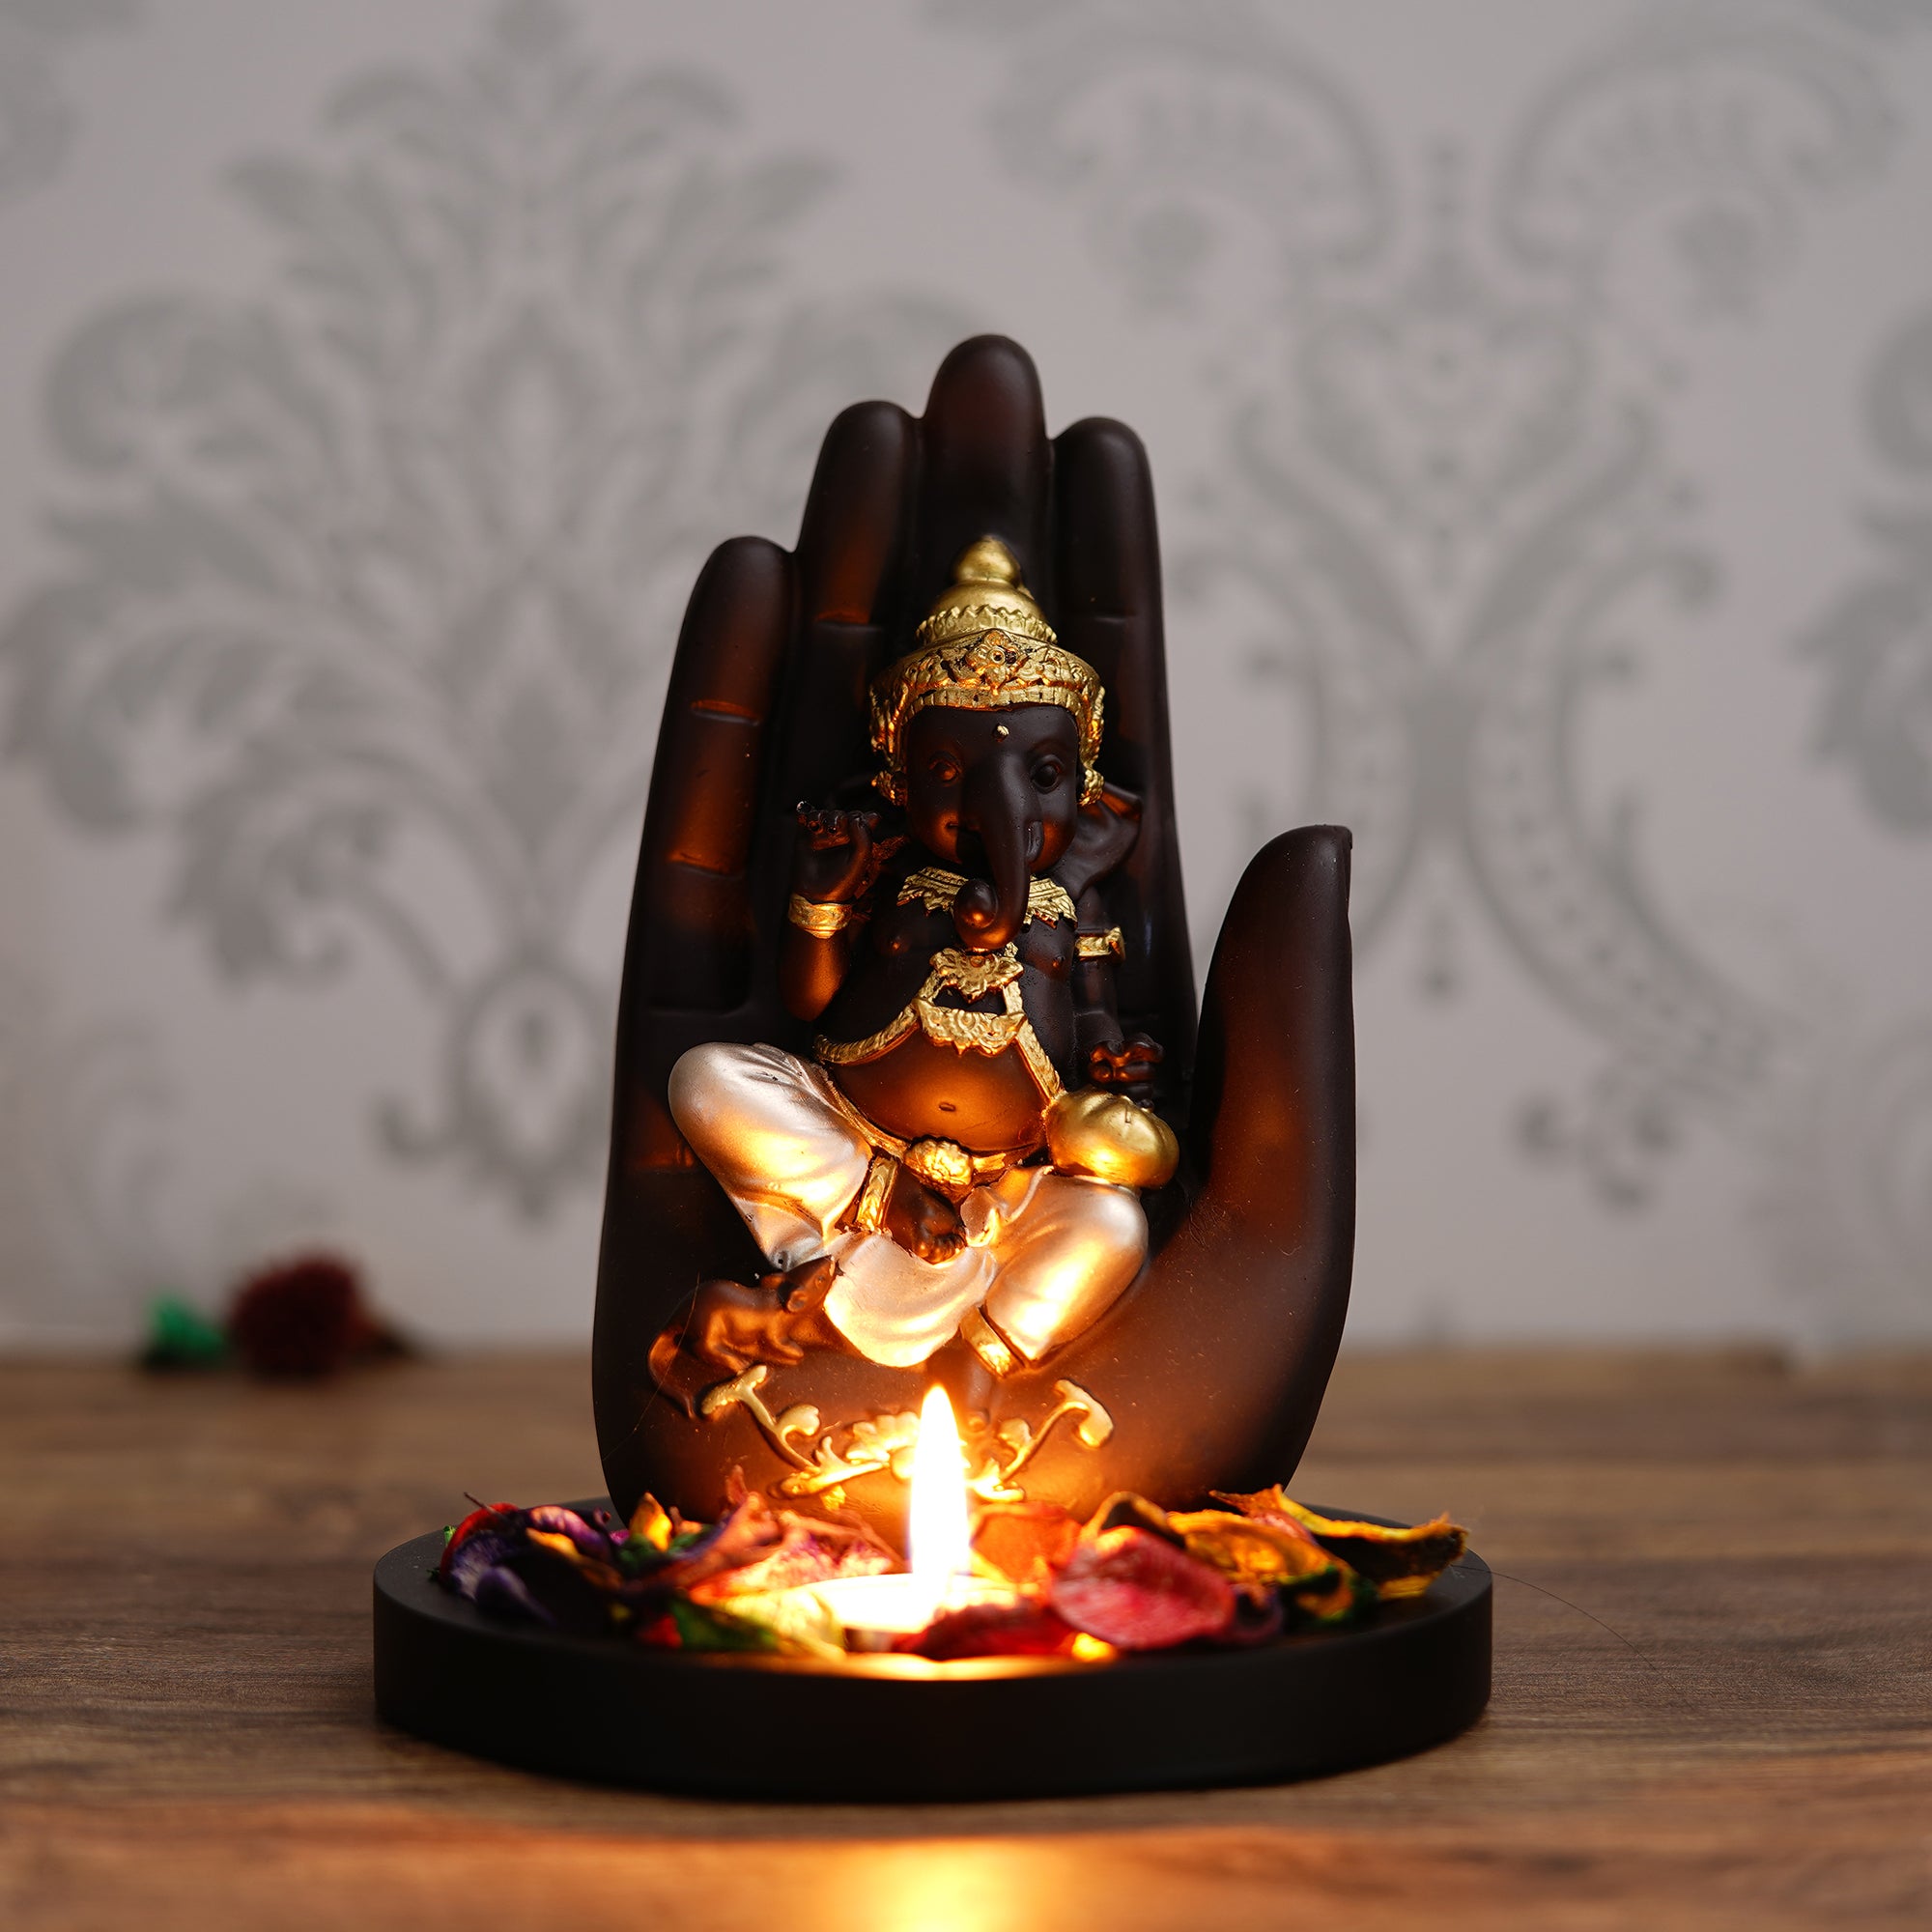 Golden and Black Handcrafted Palm Ganesha Idol on Wooden Base with Fragranced Petals Tealight Candle Holder 1